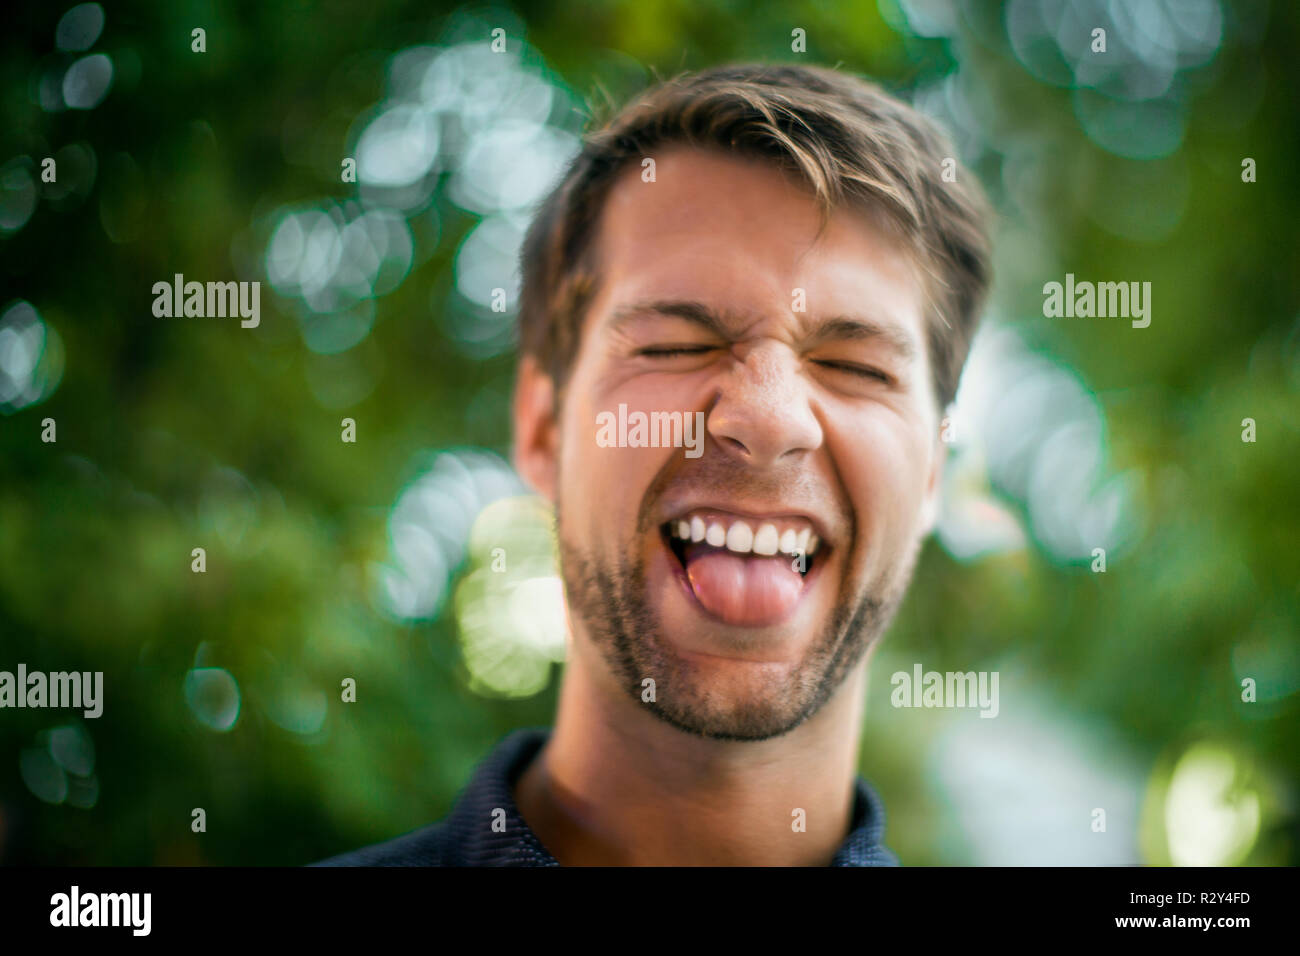 Happy young man pulling a face and sticking his tongue out. Stock Photo